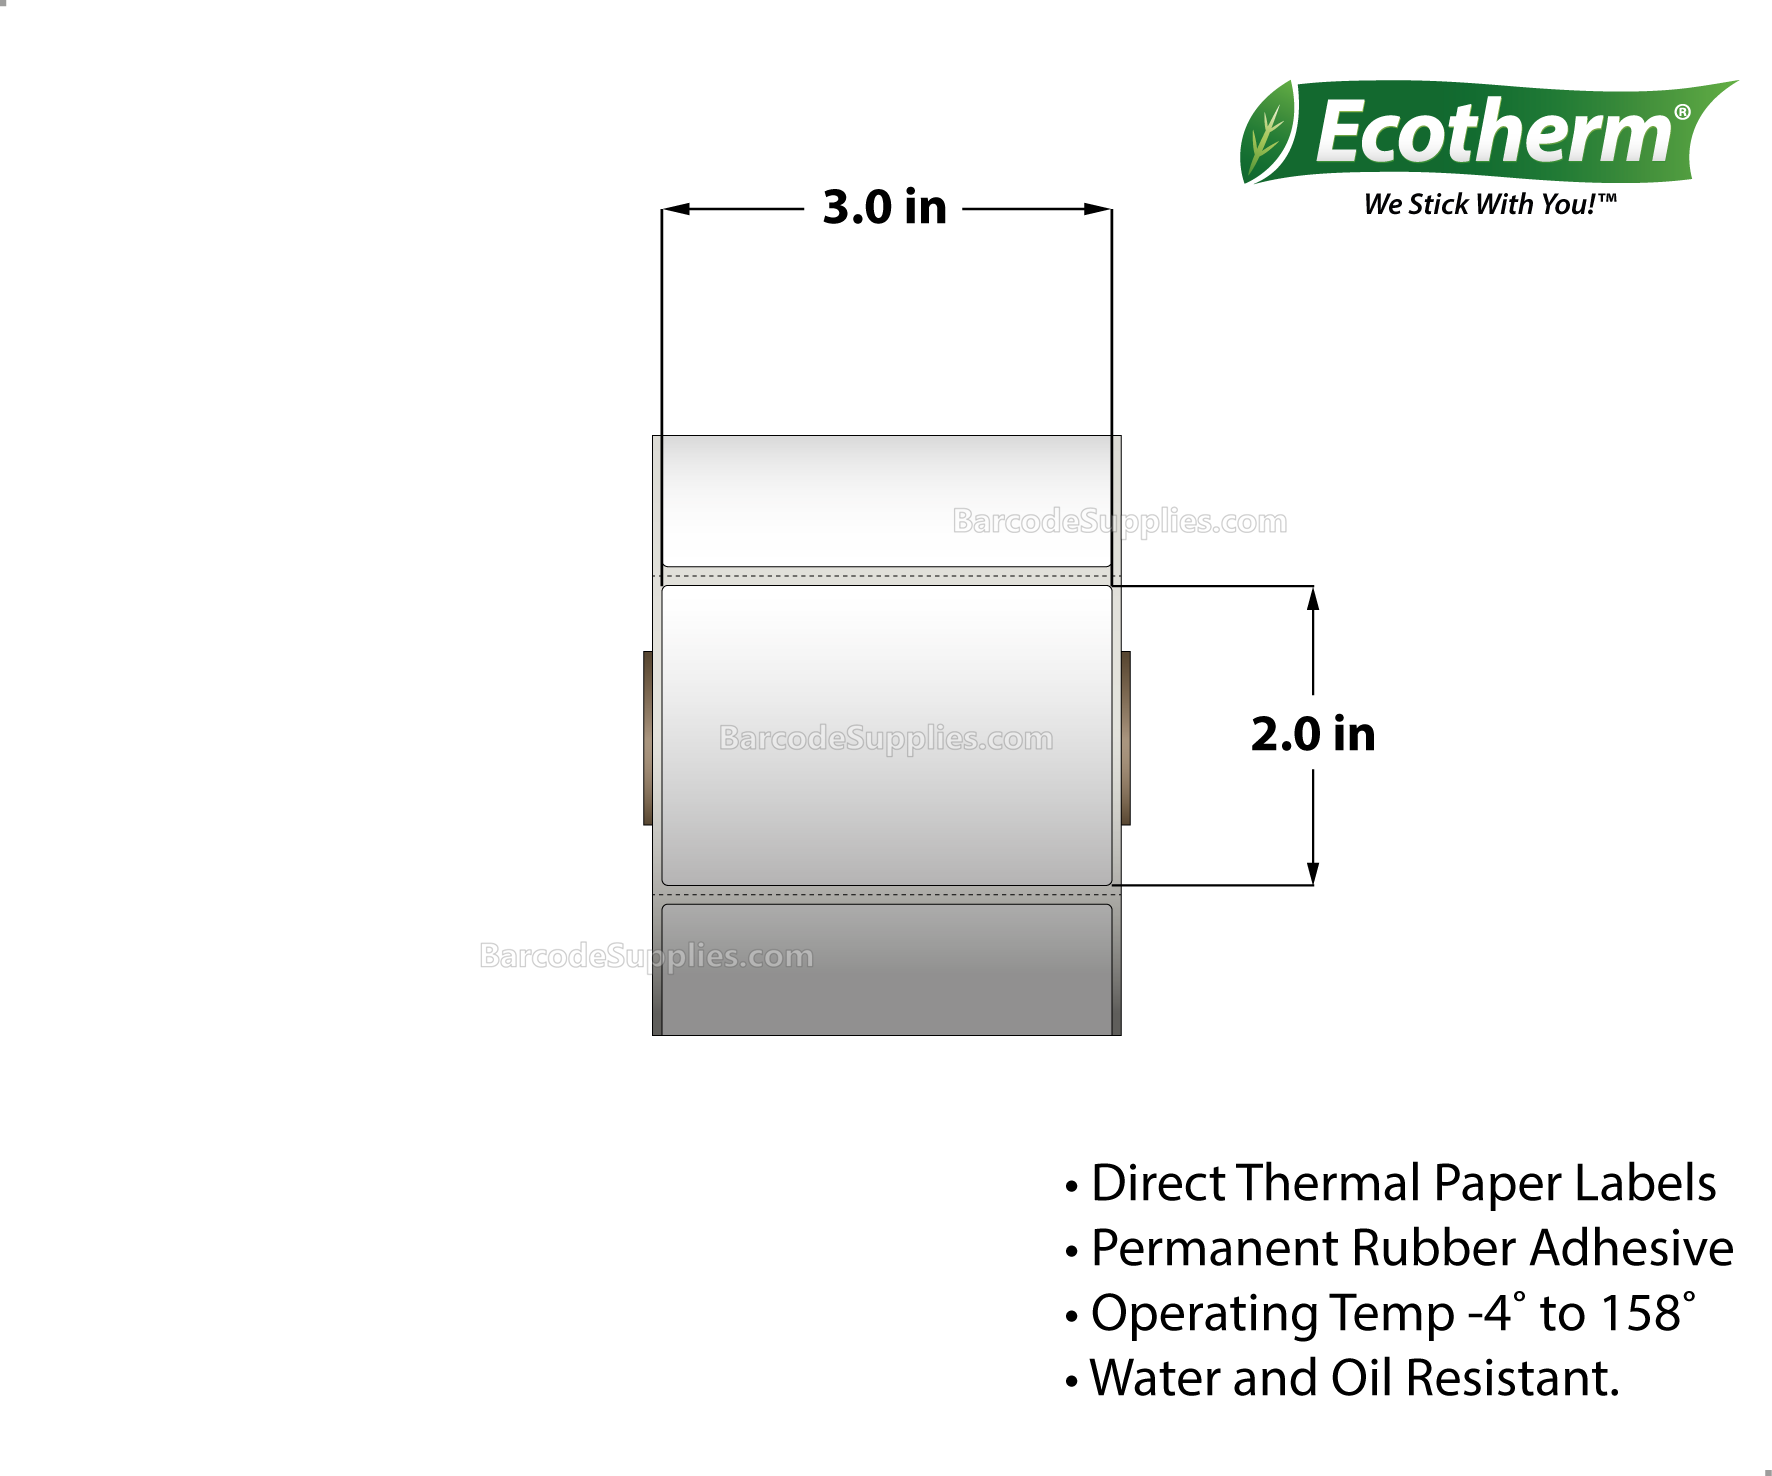 3 x 2 Direct Thermal White Labels With Rubber Adhesive - Perforated - 735 Labels Per Roll - Carton Of 4 Rolls - 2940 Labels Total - MPN: ECOTHERM14109-4